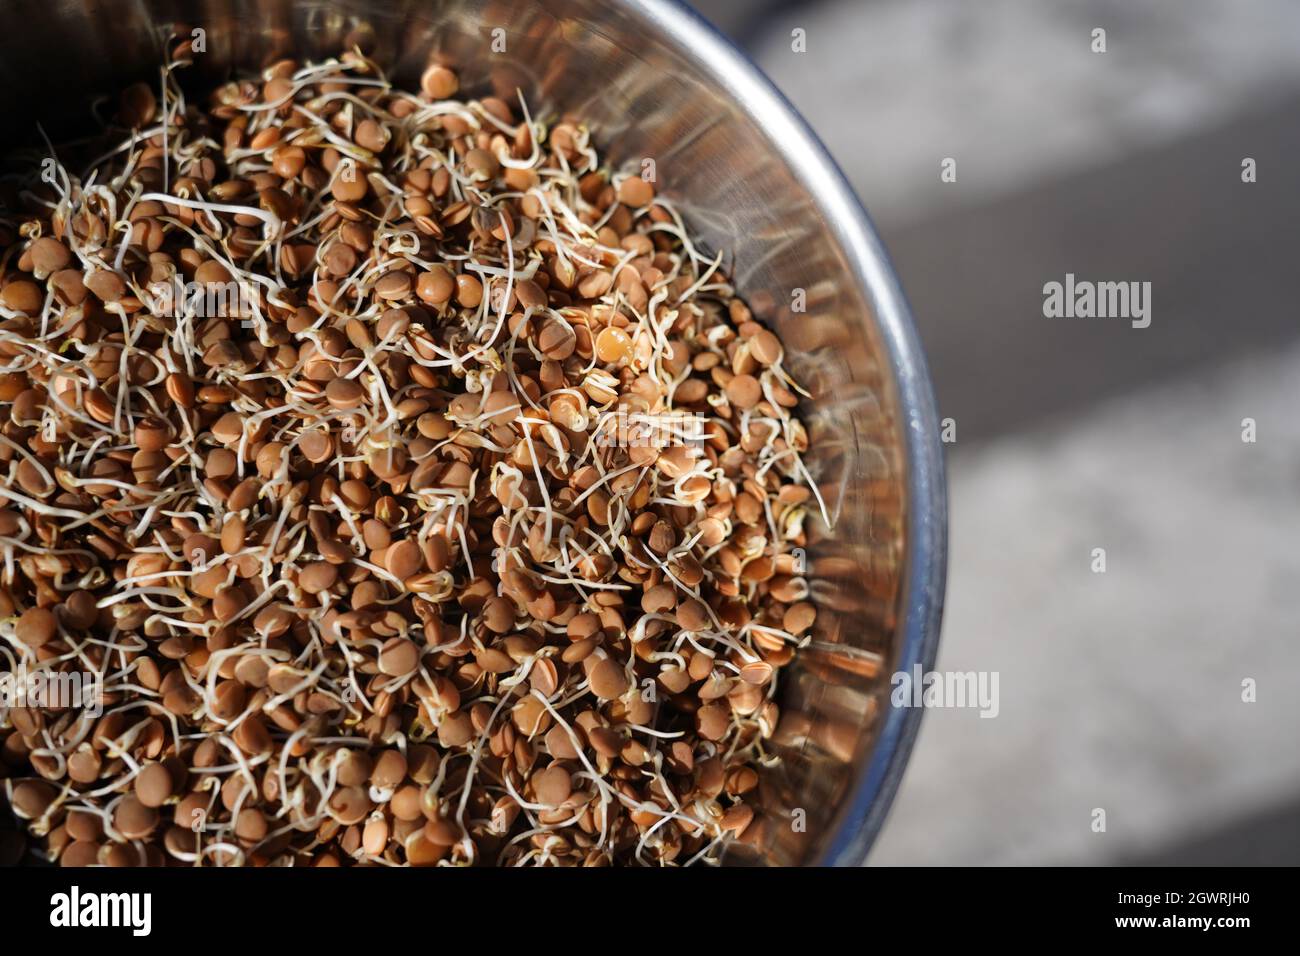 Germinated, Sprouted Lentils, Legumes Stock Photo